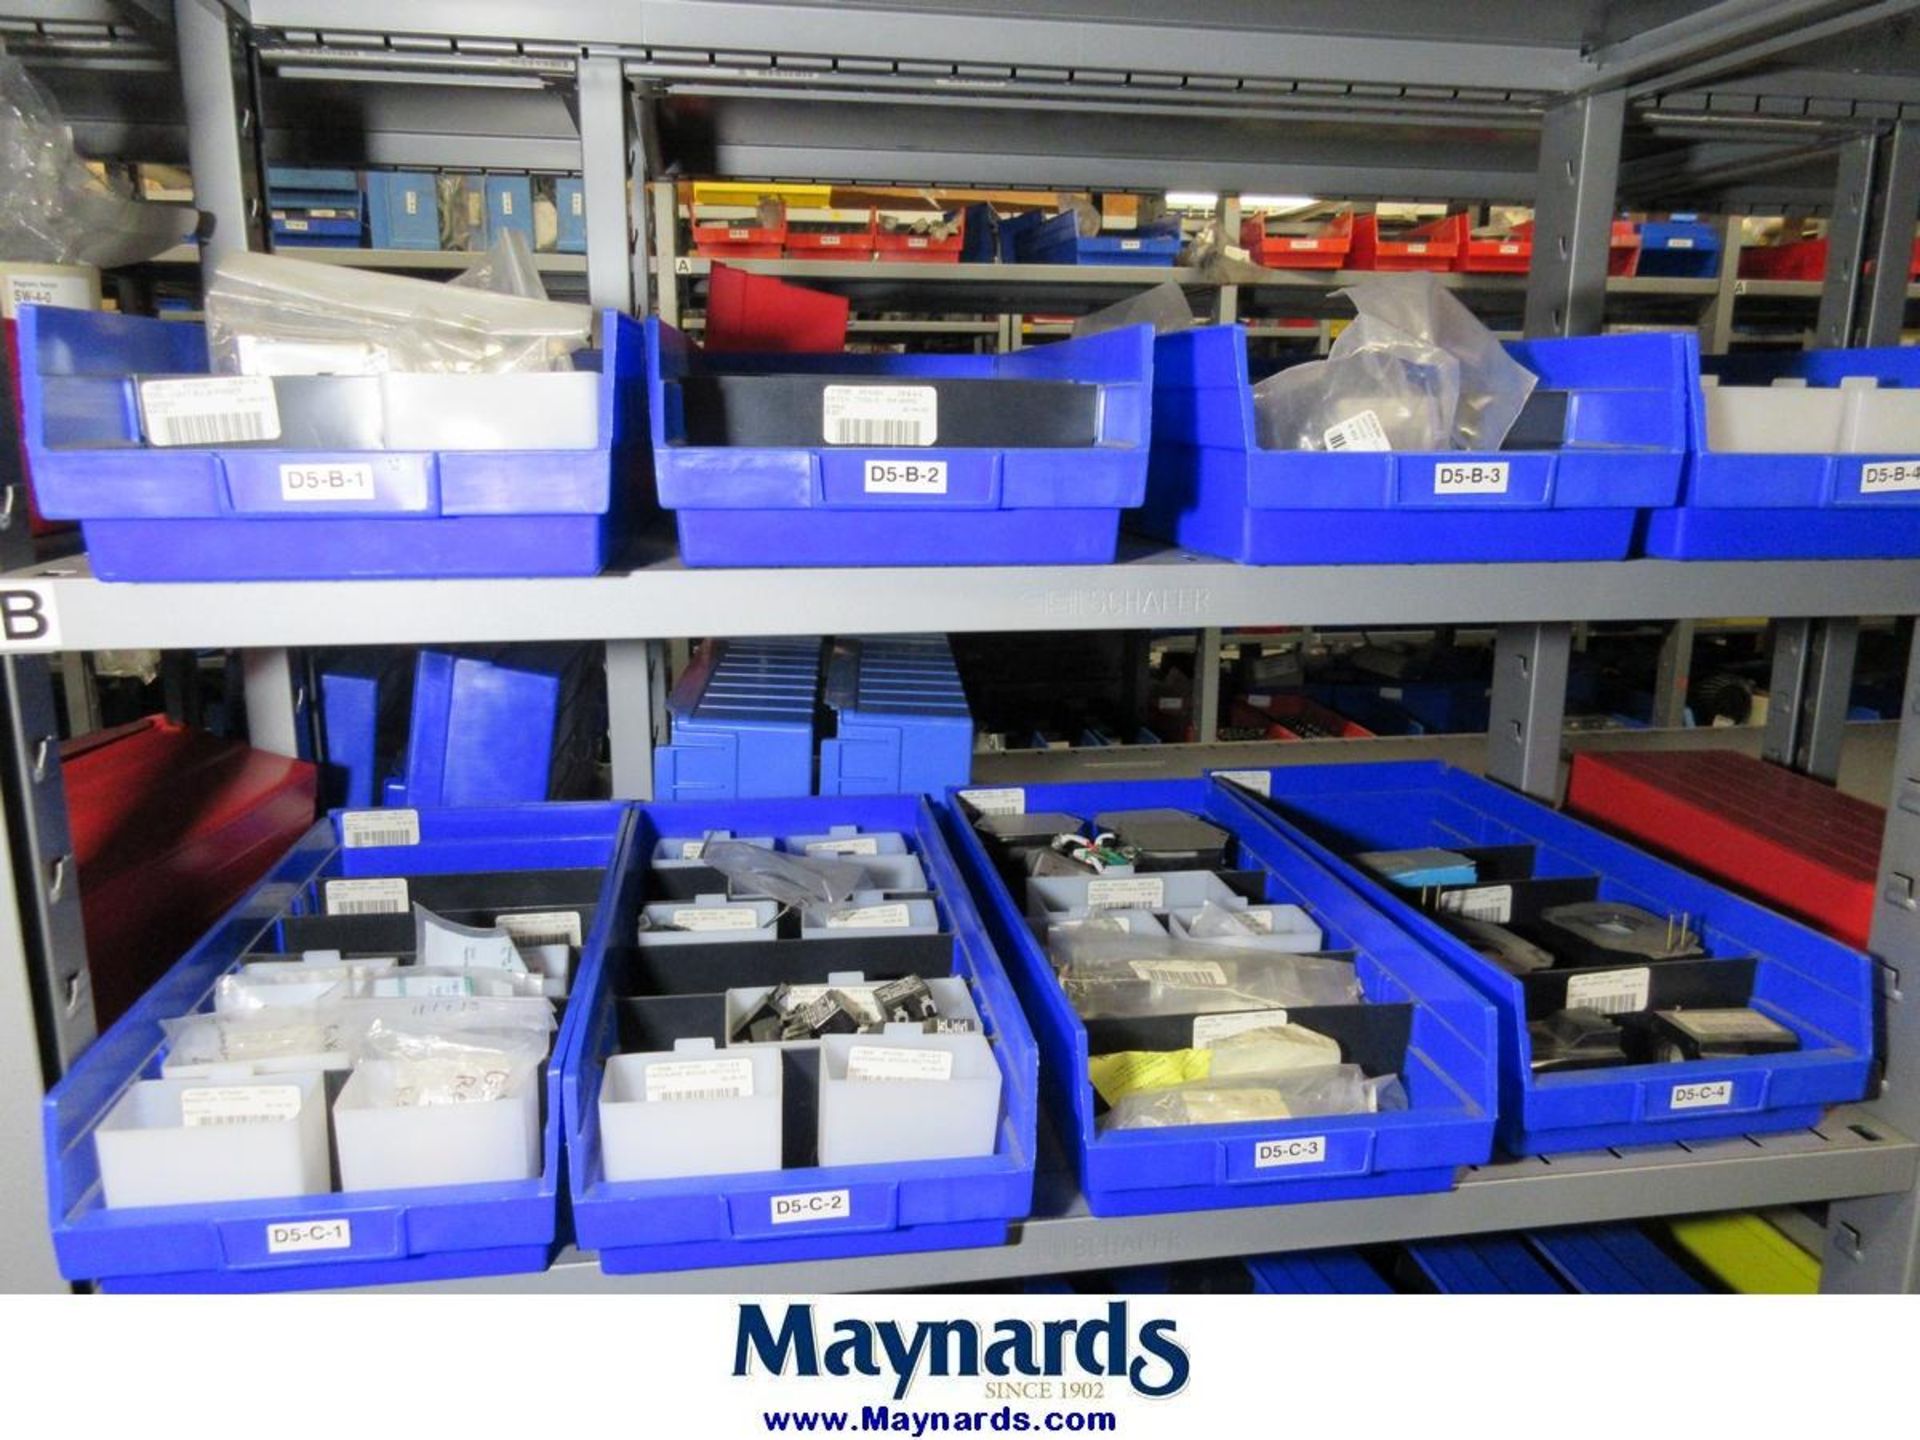 Large Lot of Electrical Controls, PLC's, Drives & Remaining Contents of Maint. Parts Crib - Image 85 of 107